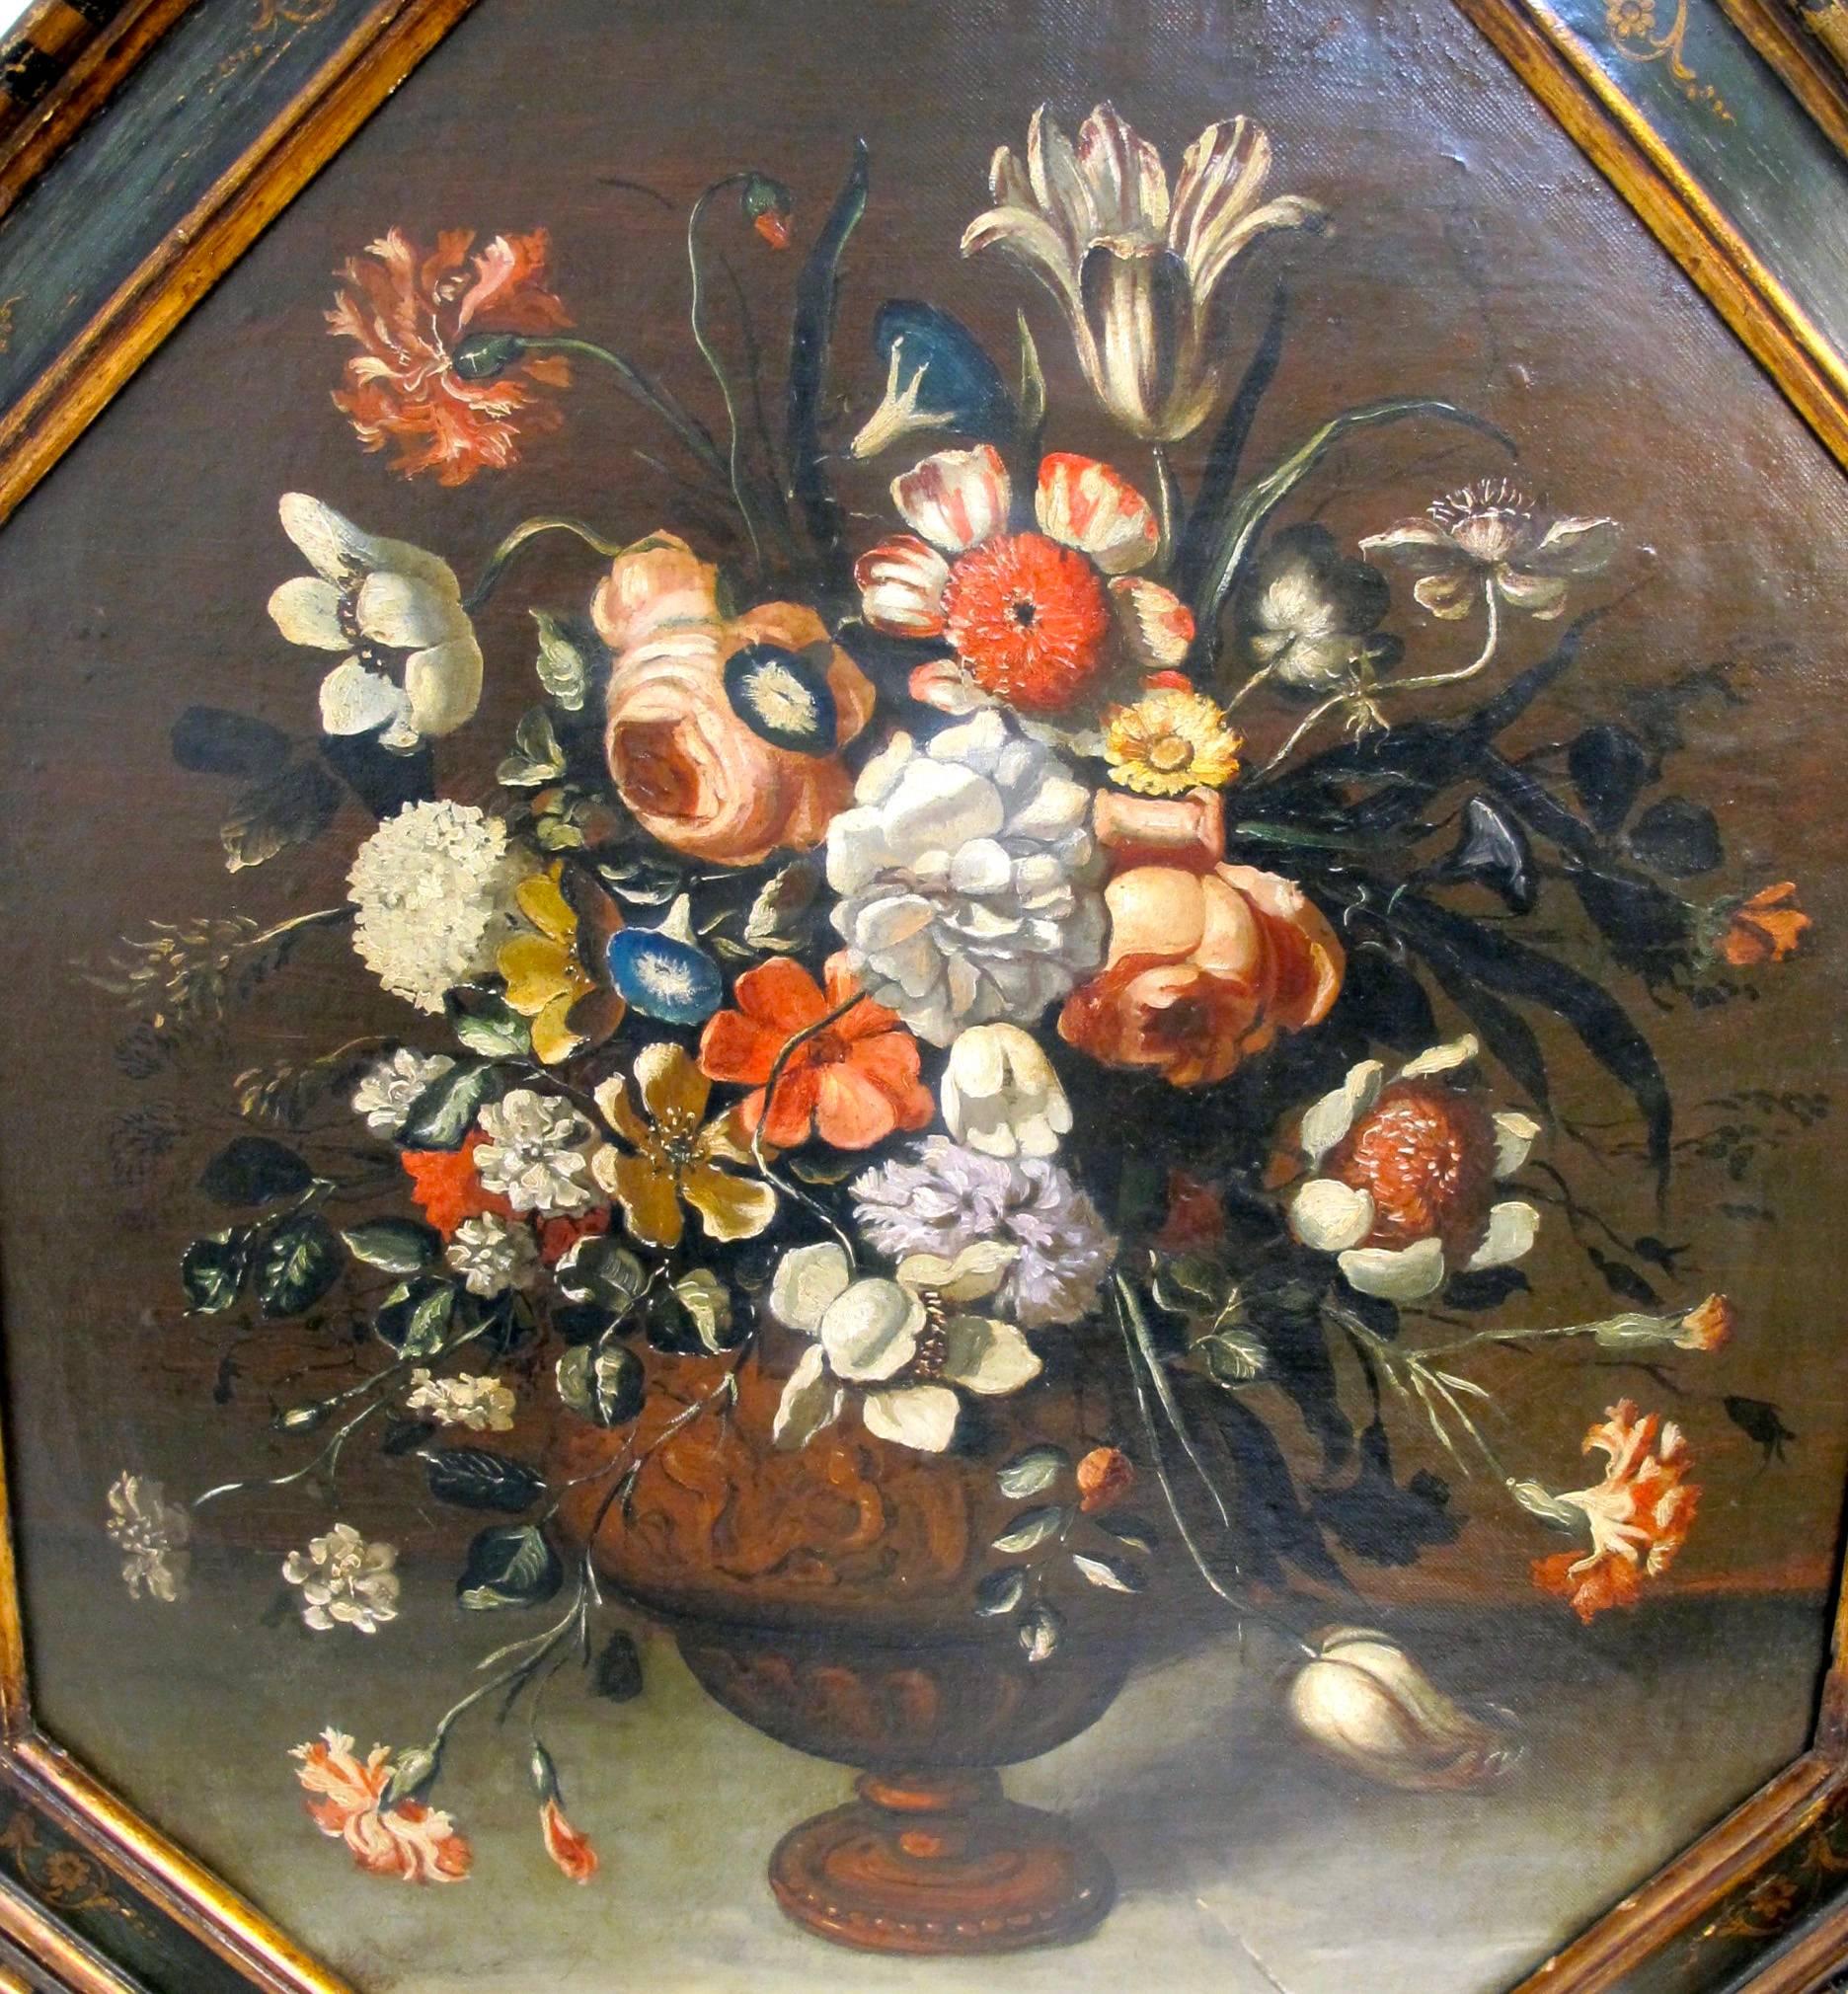 Unusually large hexagonal floral still life in the Dutch manner. Very nicely styled and executed, the large bouquet of flowers sitting in iron jardiniere with many varieties of tulips amongst the other flowers.
The painting has been restretched in